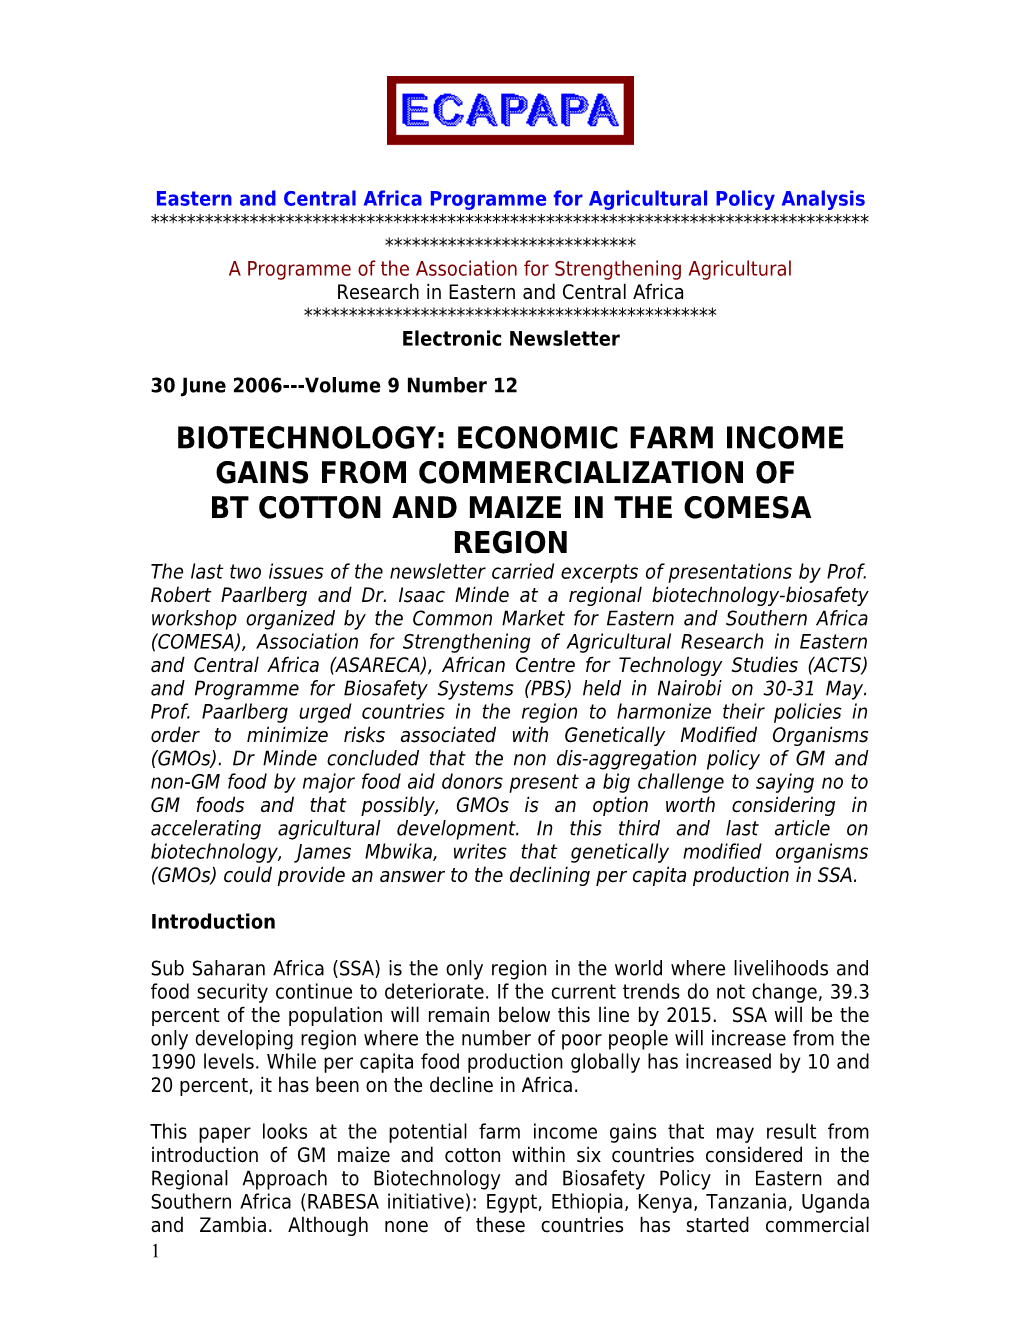 Eastern and Central Africa Programme for Agricultural Policy Analysis